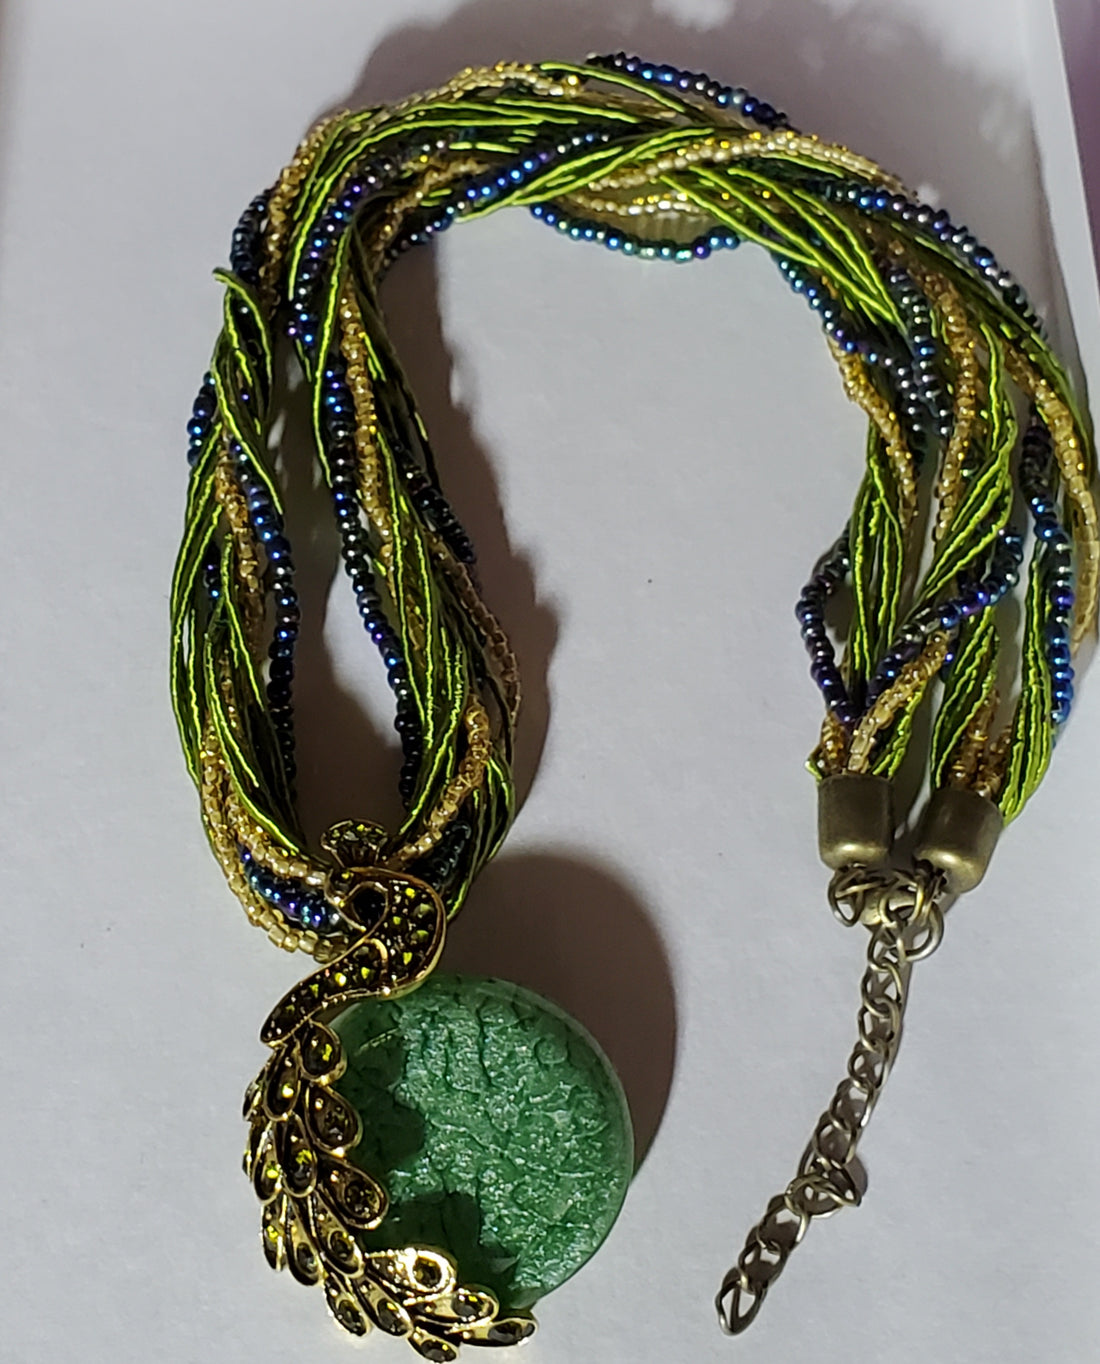 Green Peacock Necklace - 18" w/Braided Silk Cord, Rhinestone, and Glass Cabachon